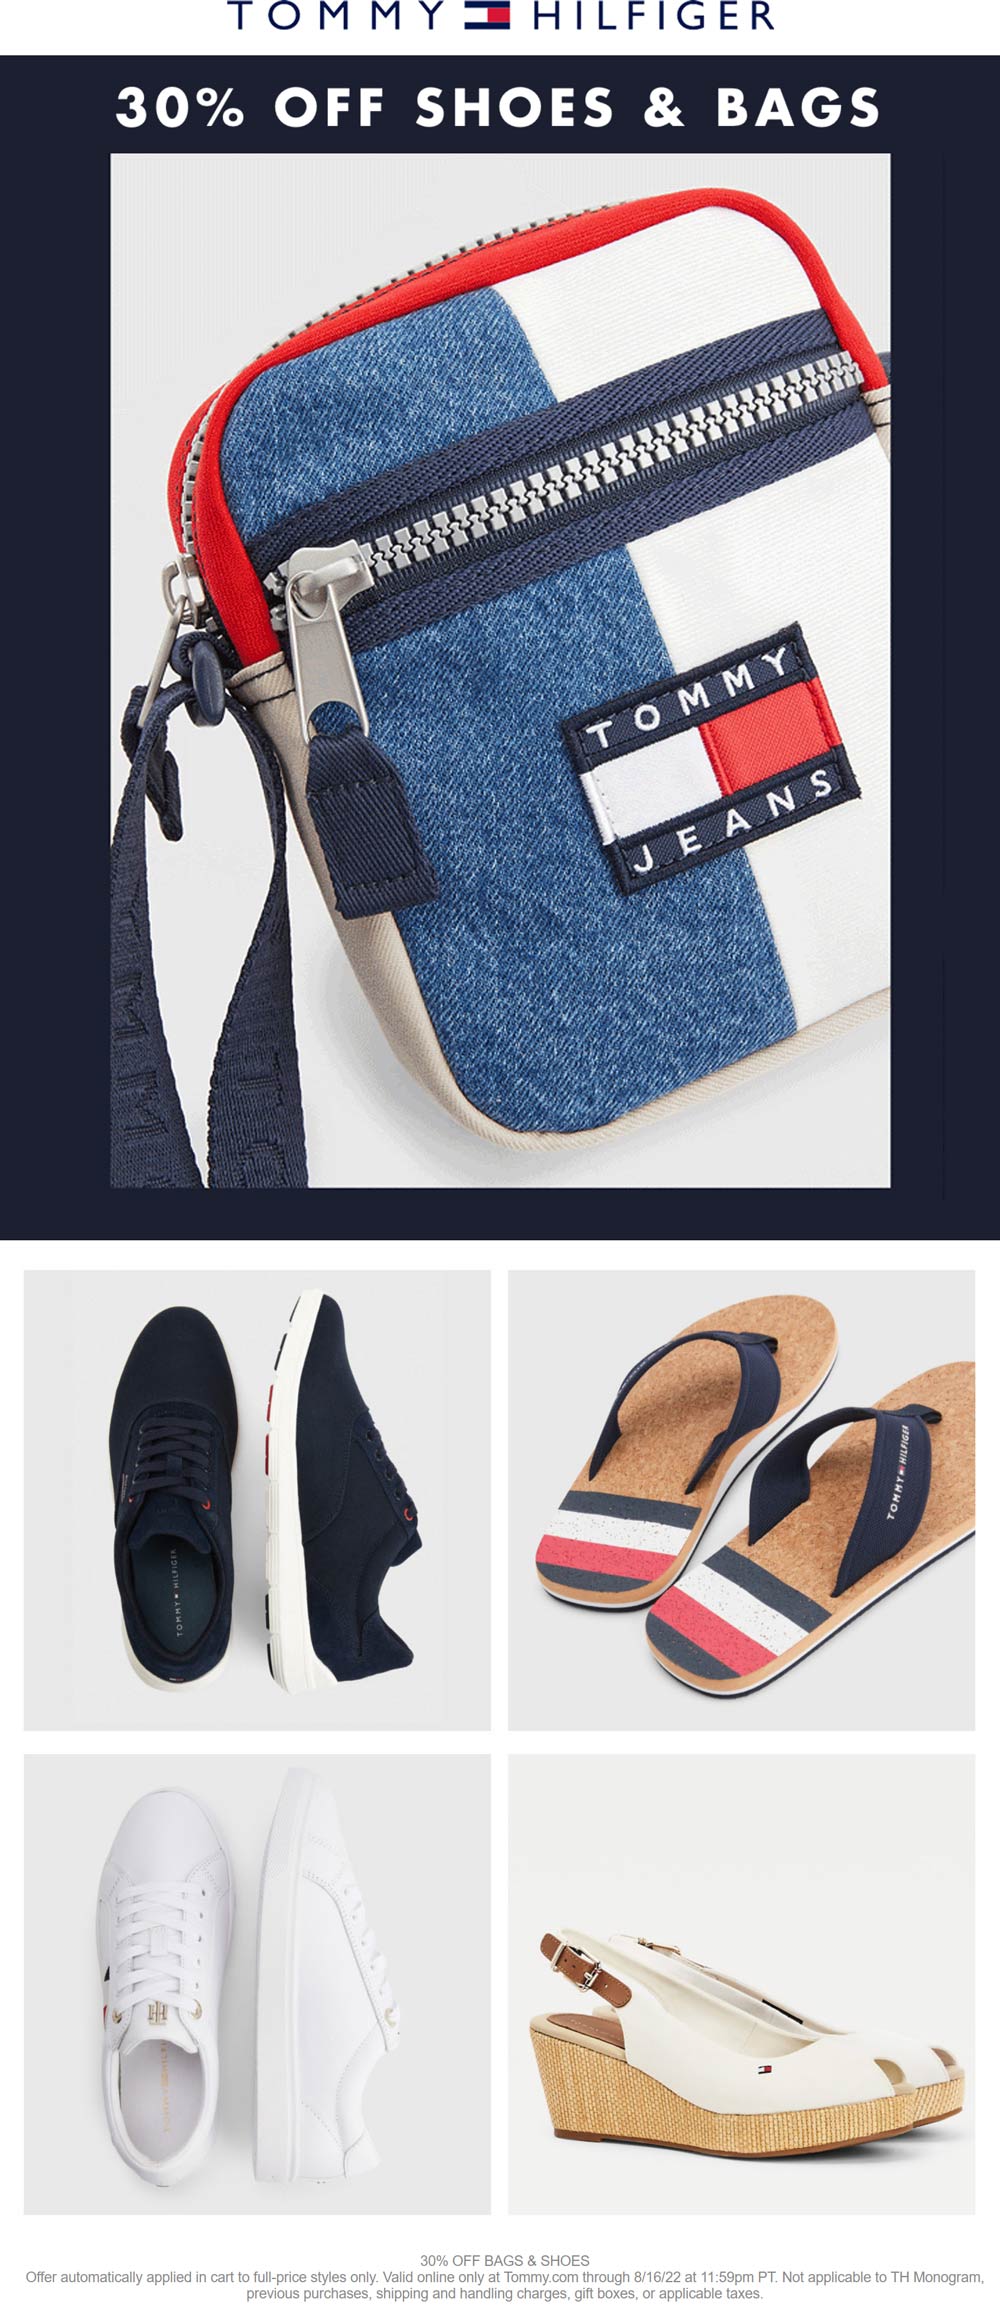 Tommy Hilfiger stores Coupon  30% off bags & shoes online today at Tommy Hilfiger #tommyhilfiger 